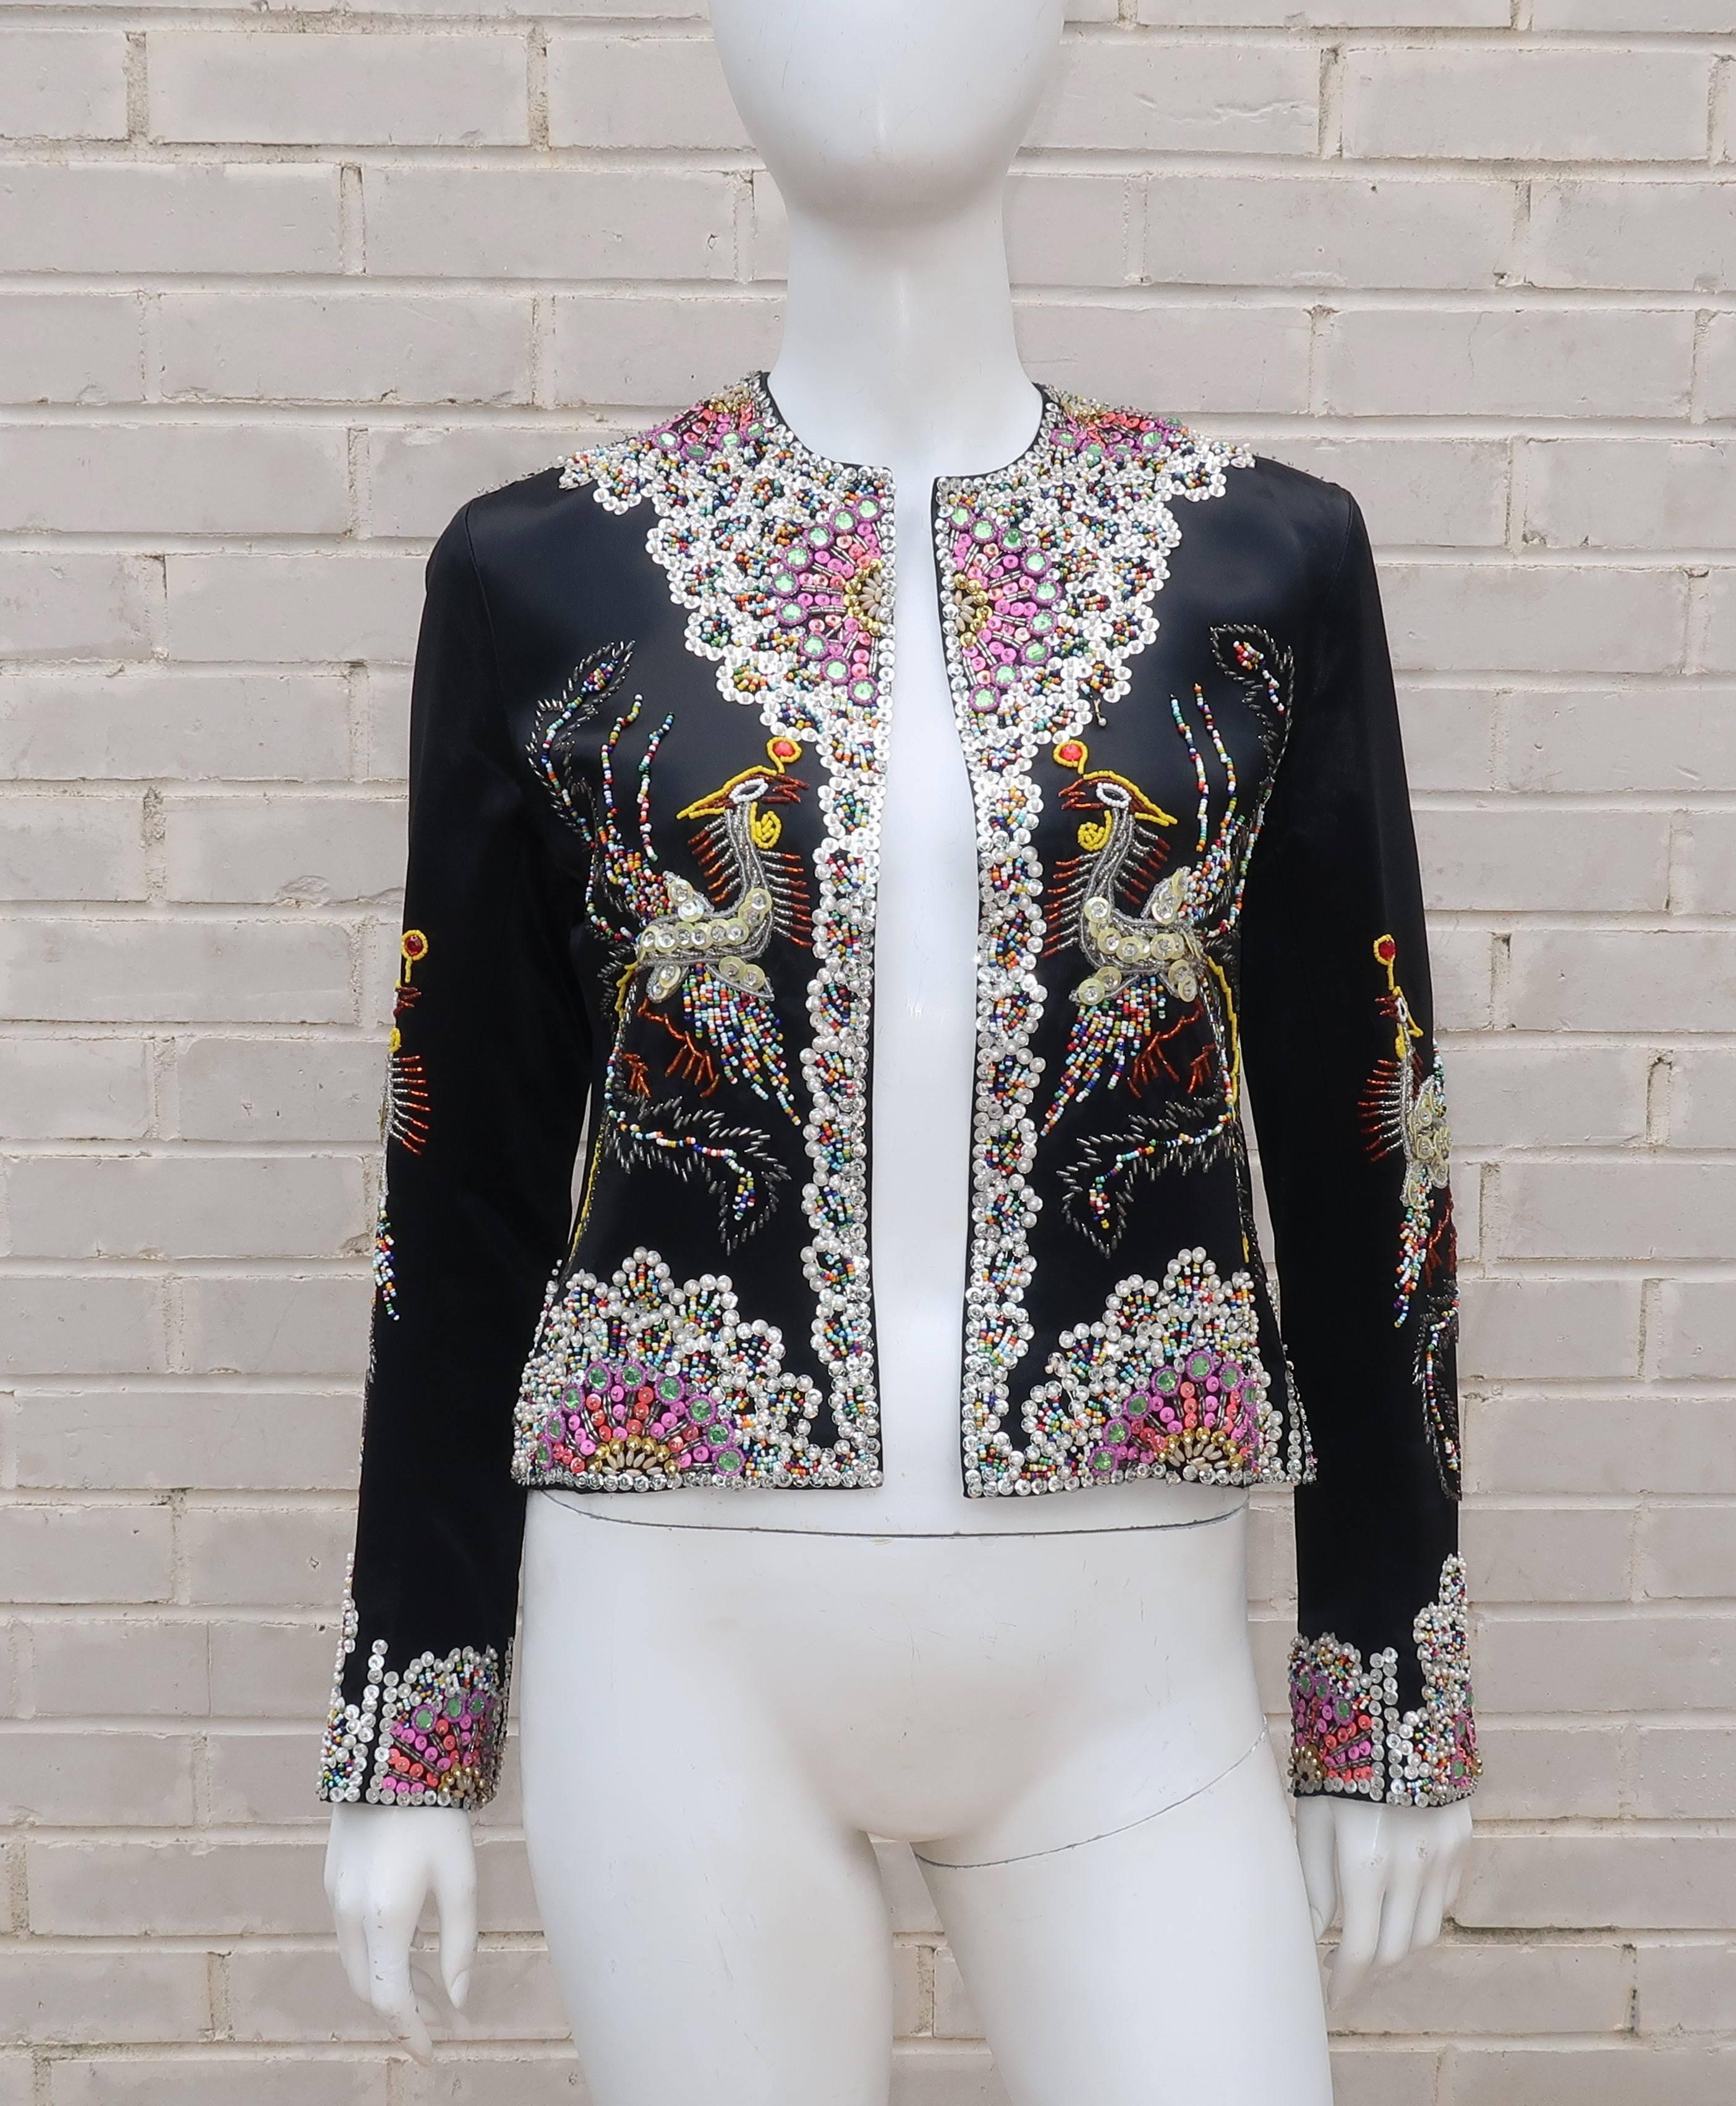 The party has arrived!  This colorful evening jacket is reminiscent of folkloric beading from the Latin Americas though it was designed under the Dynasty label which created Asian inspired silhouettes for the American market.  The fabulous mix of